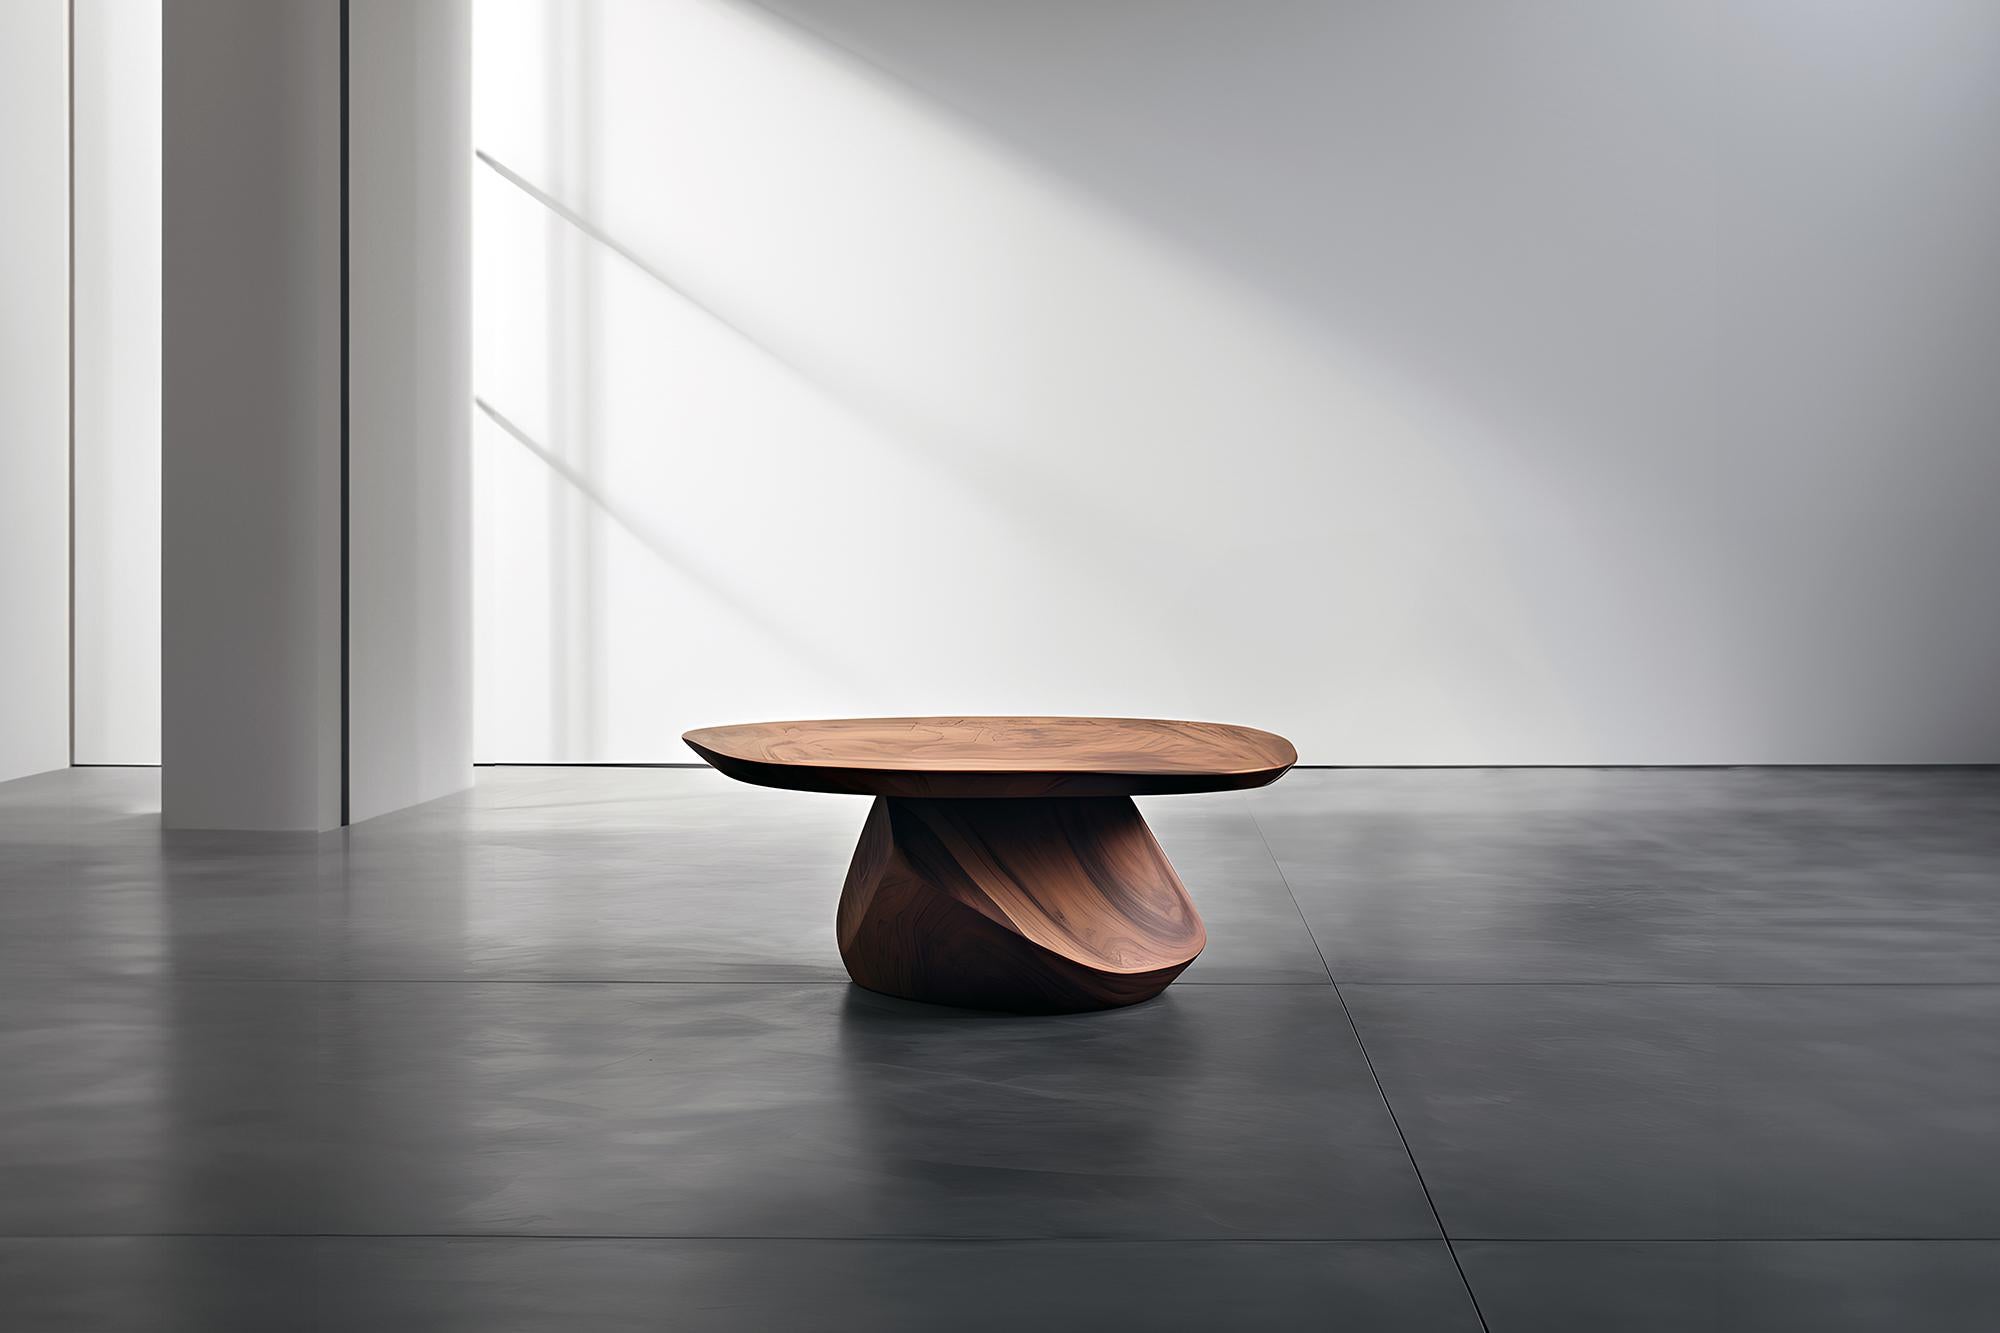 Sculptural Coffee Table Made of Solid Wood, Center Table Solace S38 by Joel Escalona


The Solace table series, designed by Joel Escalona, is a furniture collection that exudes balance and presence, thanks to its sensuous, dense, and irregular